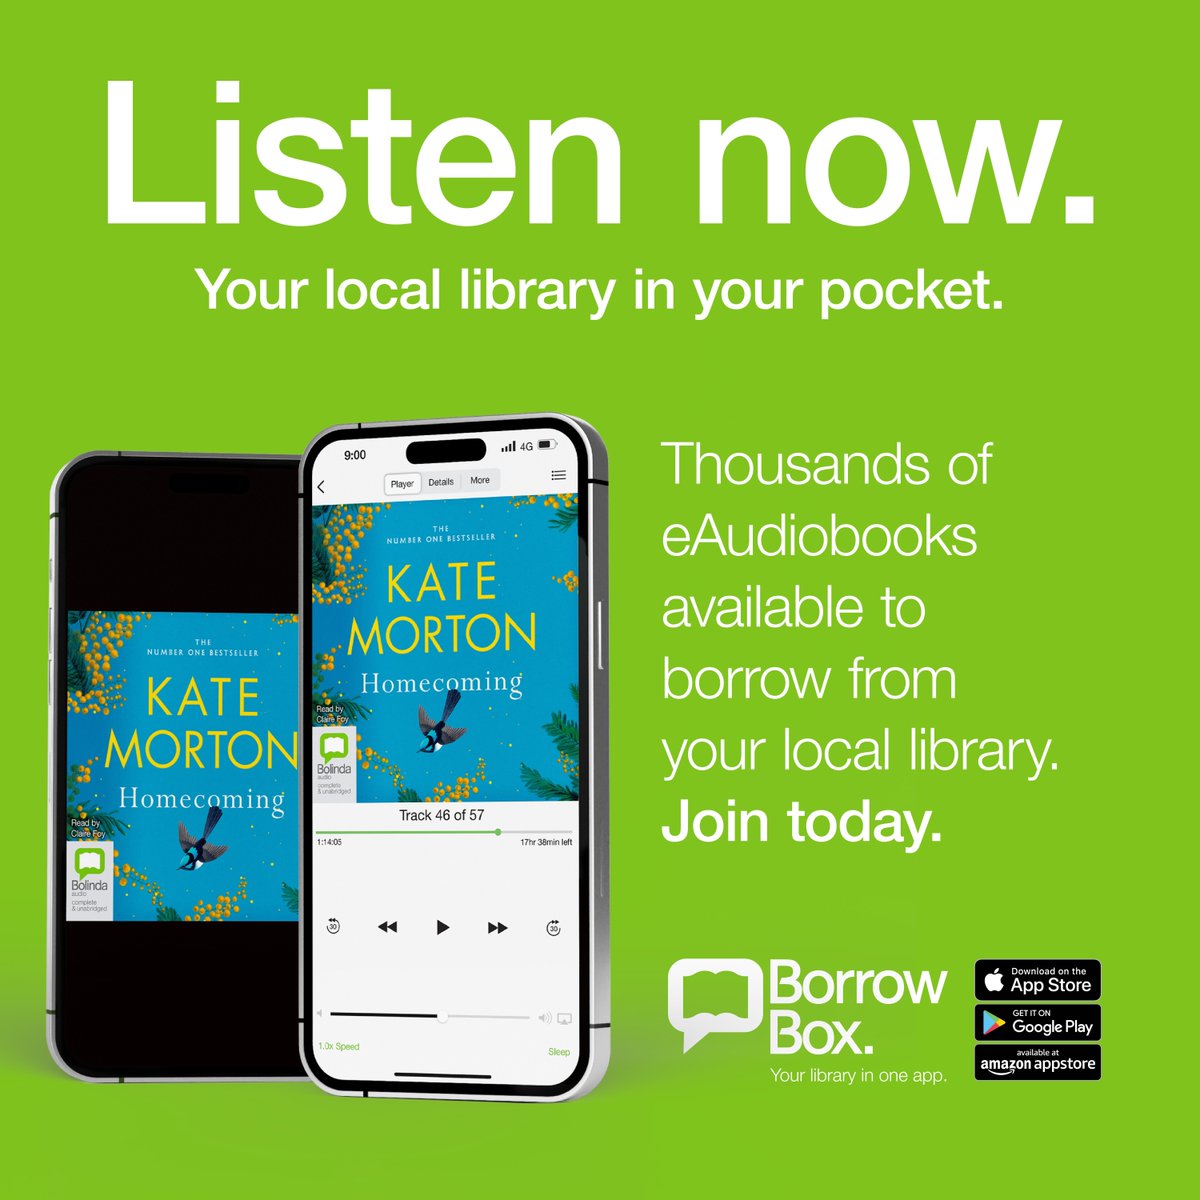 Borrow eBooks &eAudiobooks for FREE from #BorrowBox! You just need your library card and pin to sign up. Available as Unlimited titles from 22nd April for 60 days - no queue: 📌 eBook - Lucy Coleman: Finding Love in Positano 📌 eAudio - Kate Morton: Homecoming